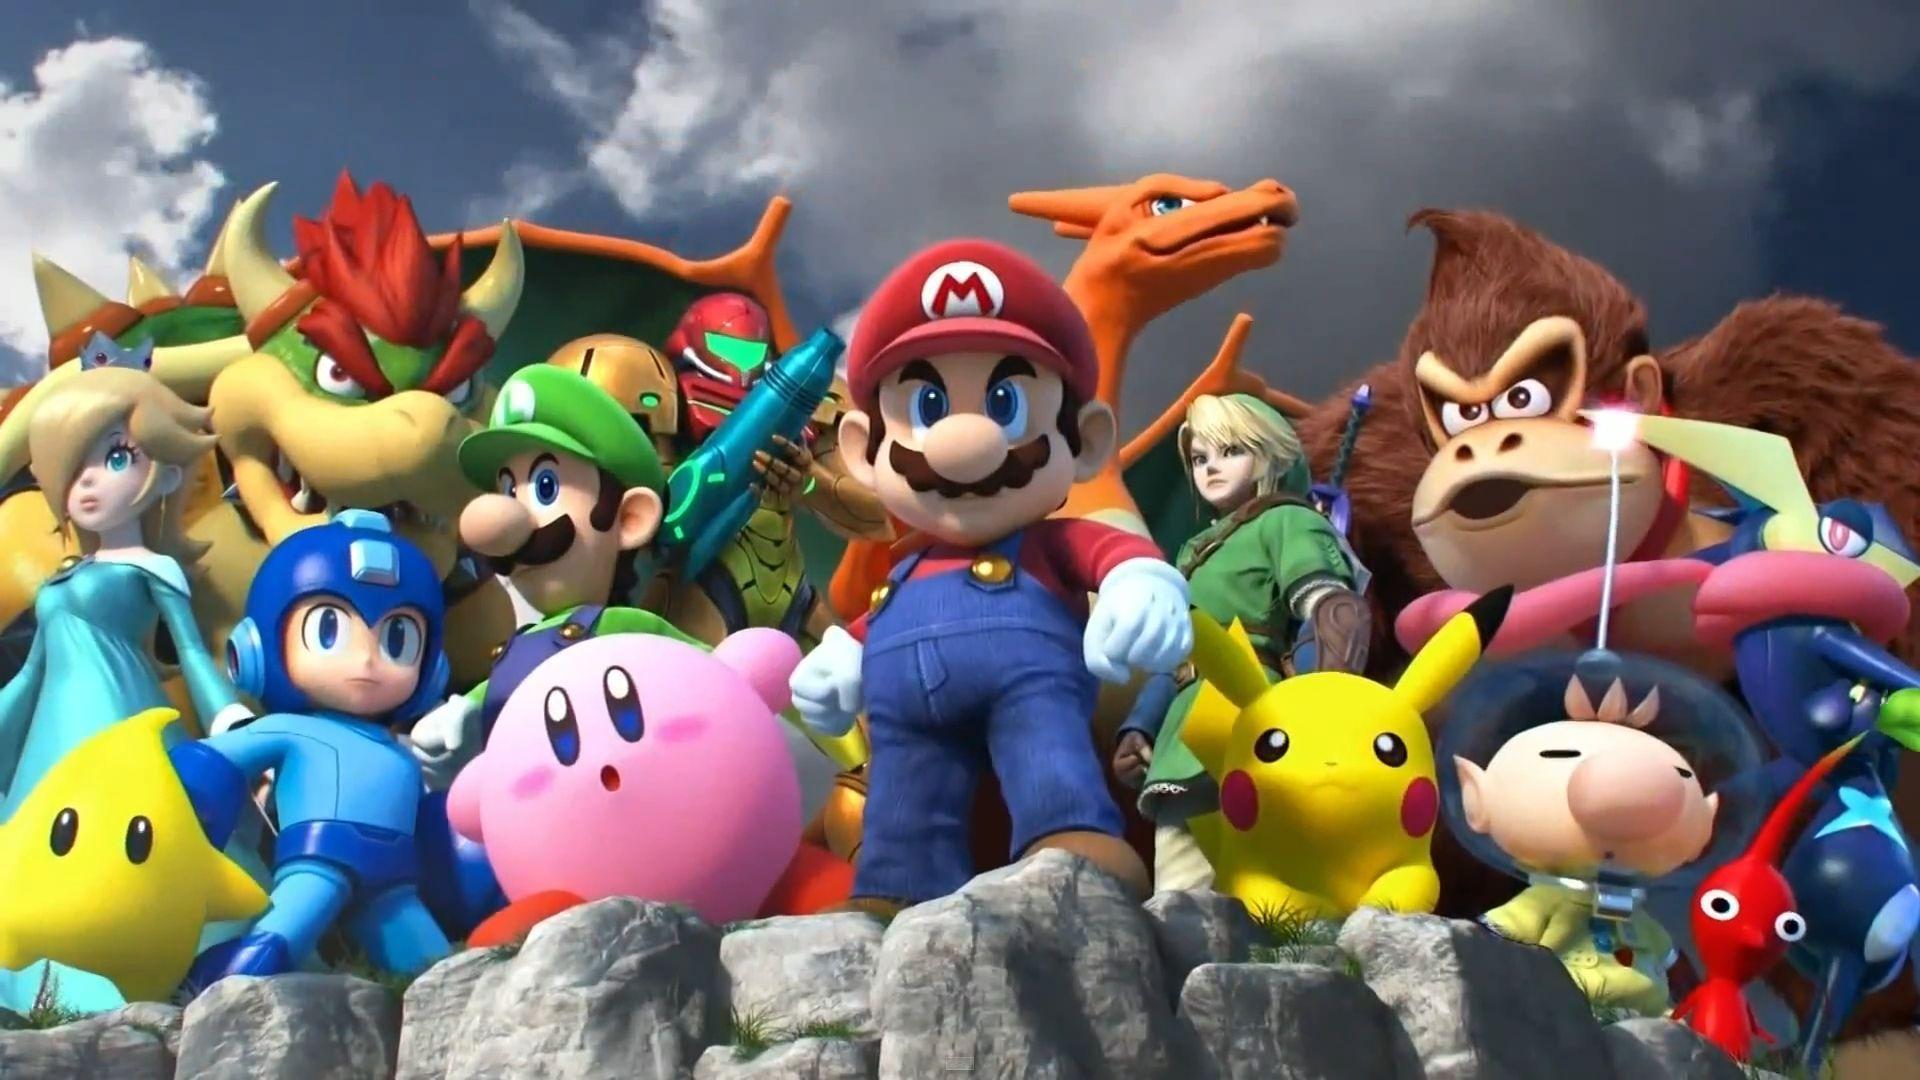 10 Most Popular Super Smash Bros Wallpapers FULL HD 1080p For PC